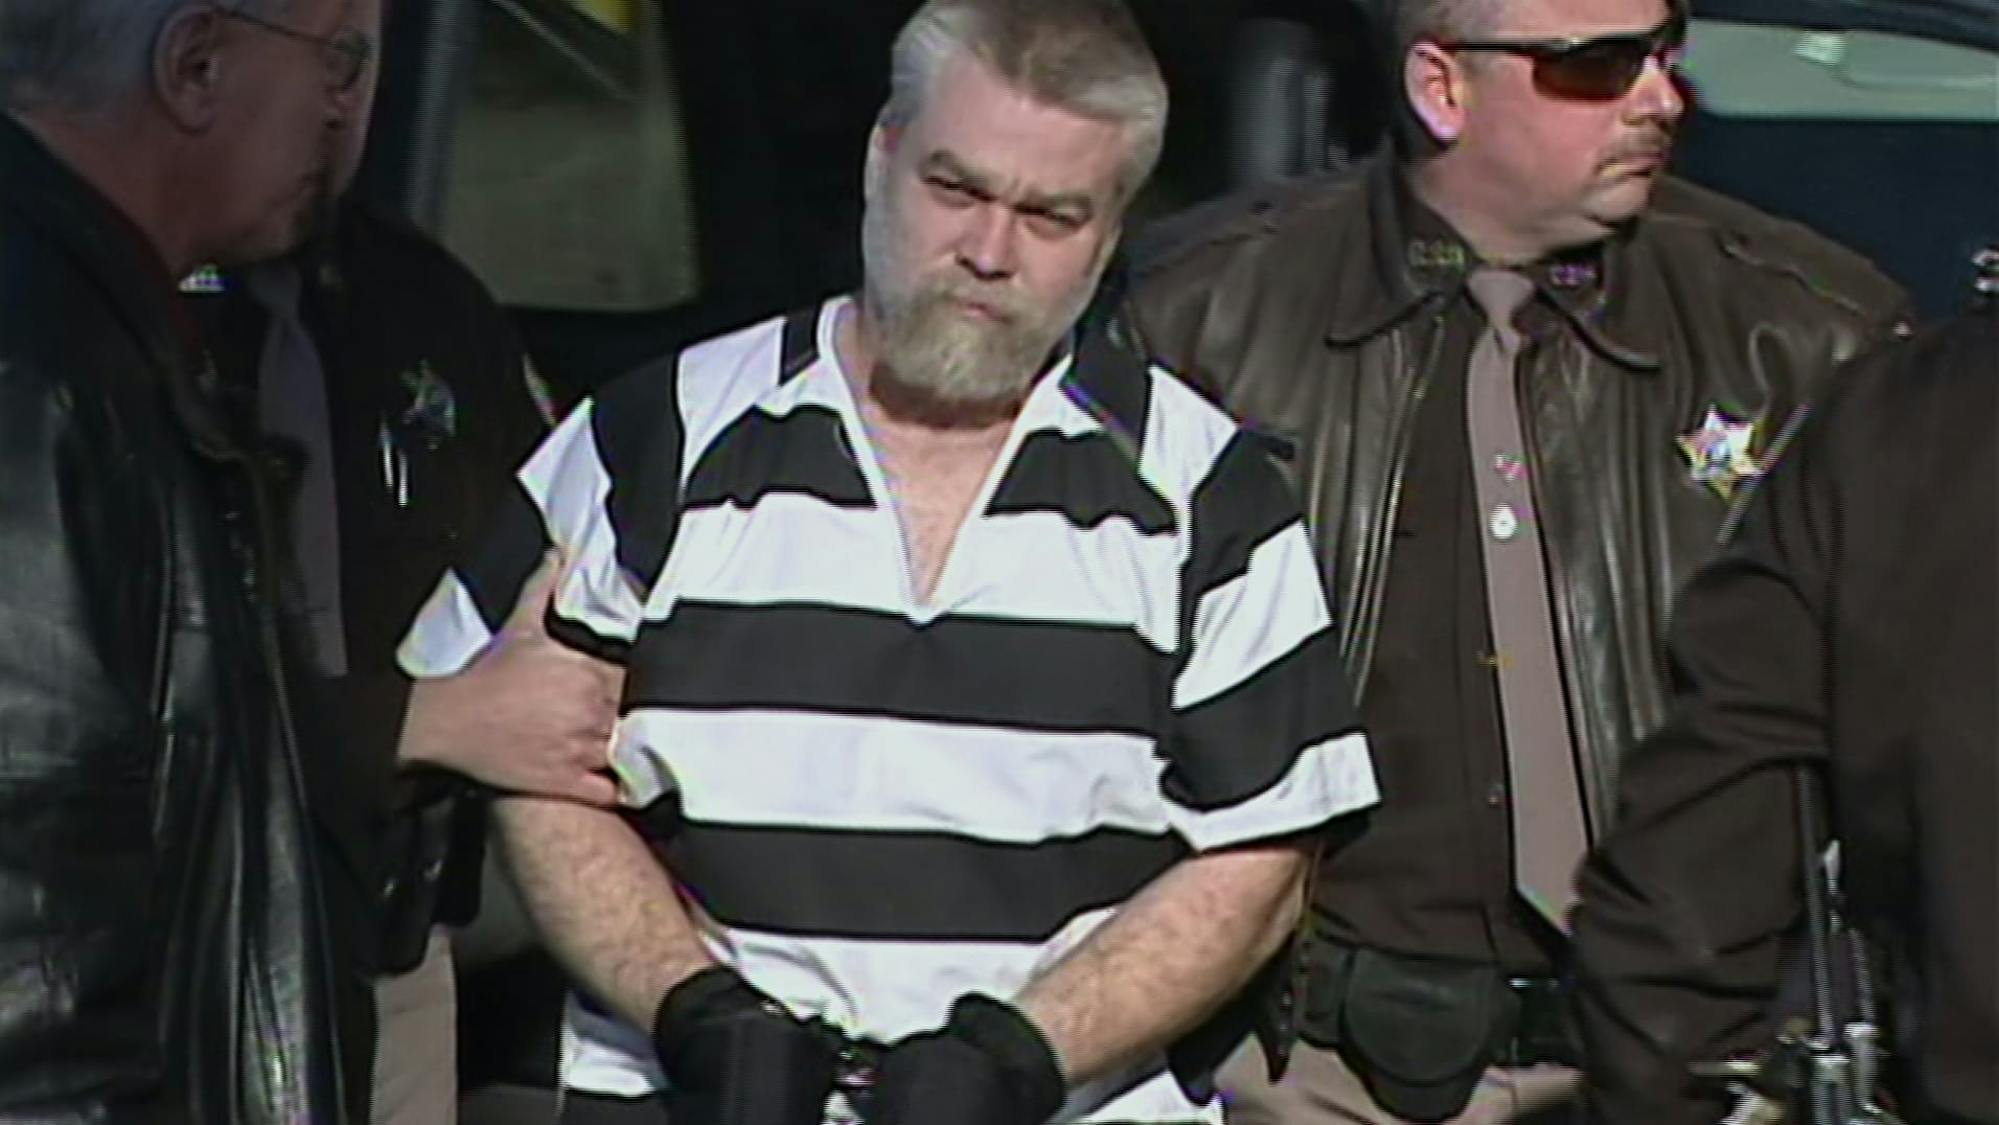 Steven Avery in Making a Murderer walks outside in a brown and white striped shirt. His hands are cuffs, and he is guided by sheriffs in brown leather jackets.